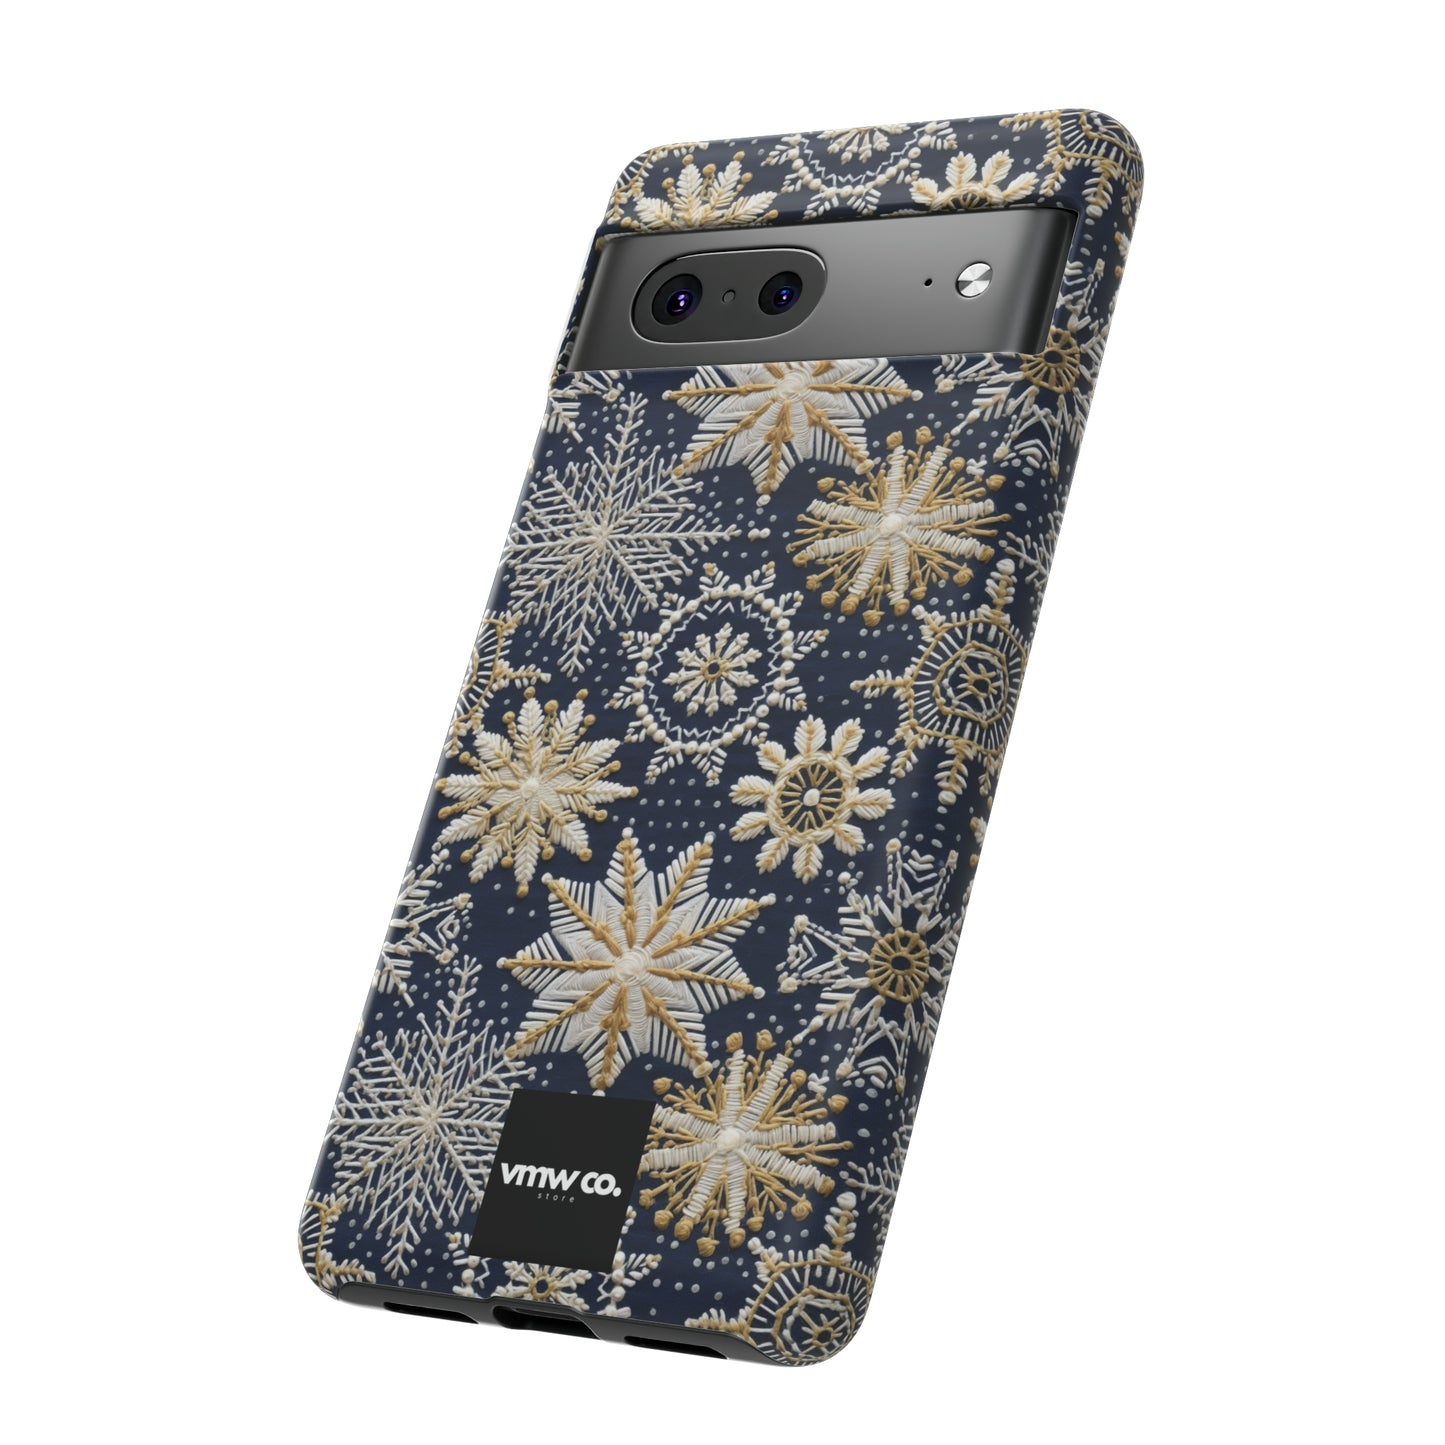 Midnight Snowflake Android Tough Cases